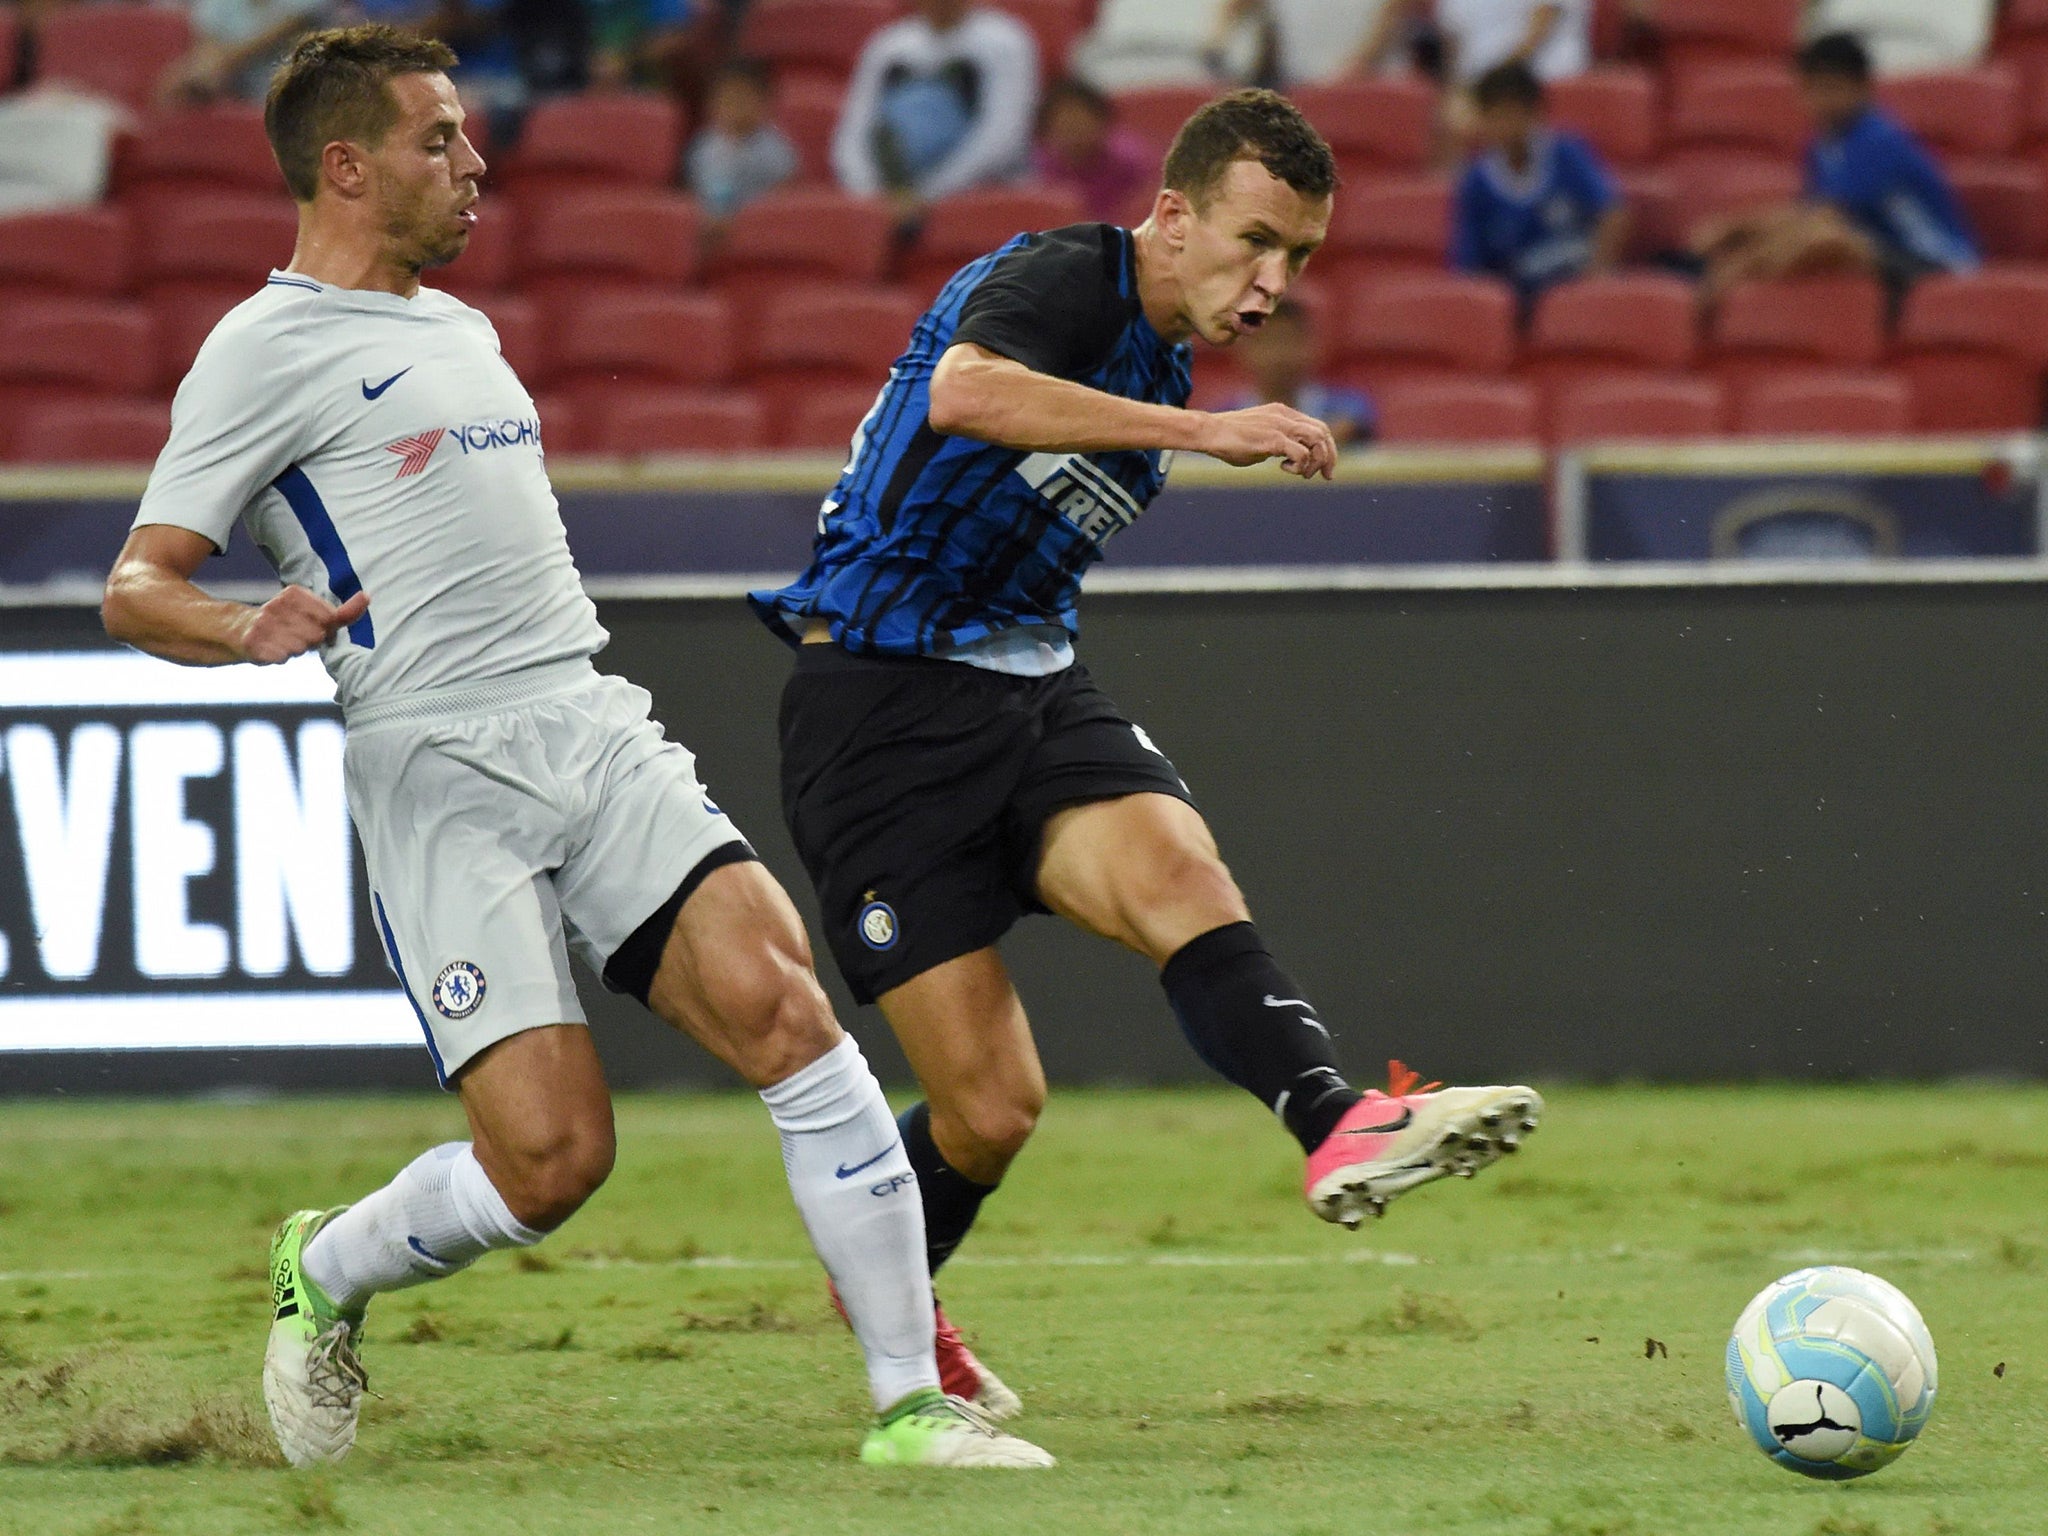 Perisic looks likely to remain at Inter Milan